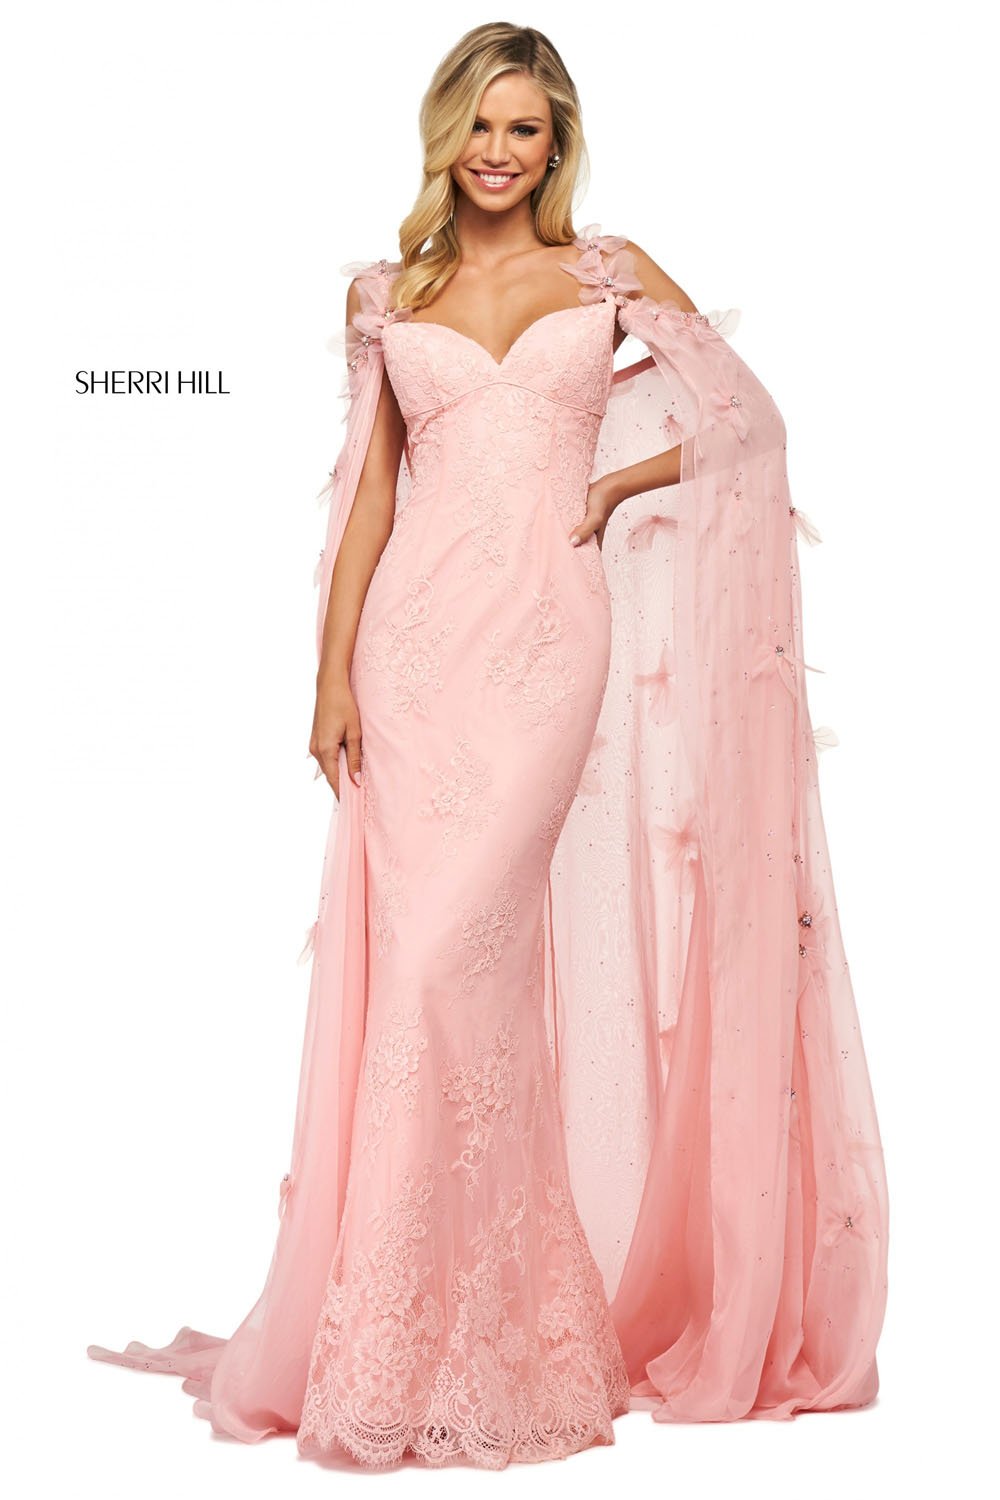 Sherri Hill 53822 dress images in these colors: Blush, Ivory.